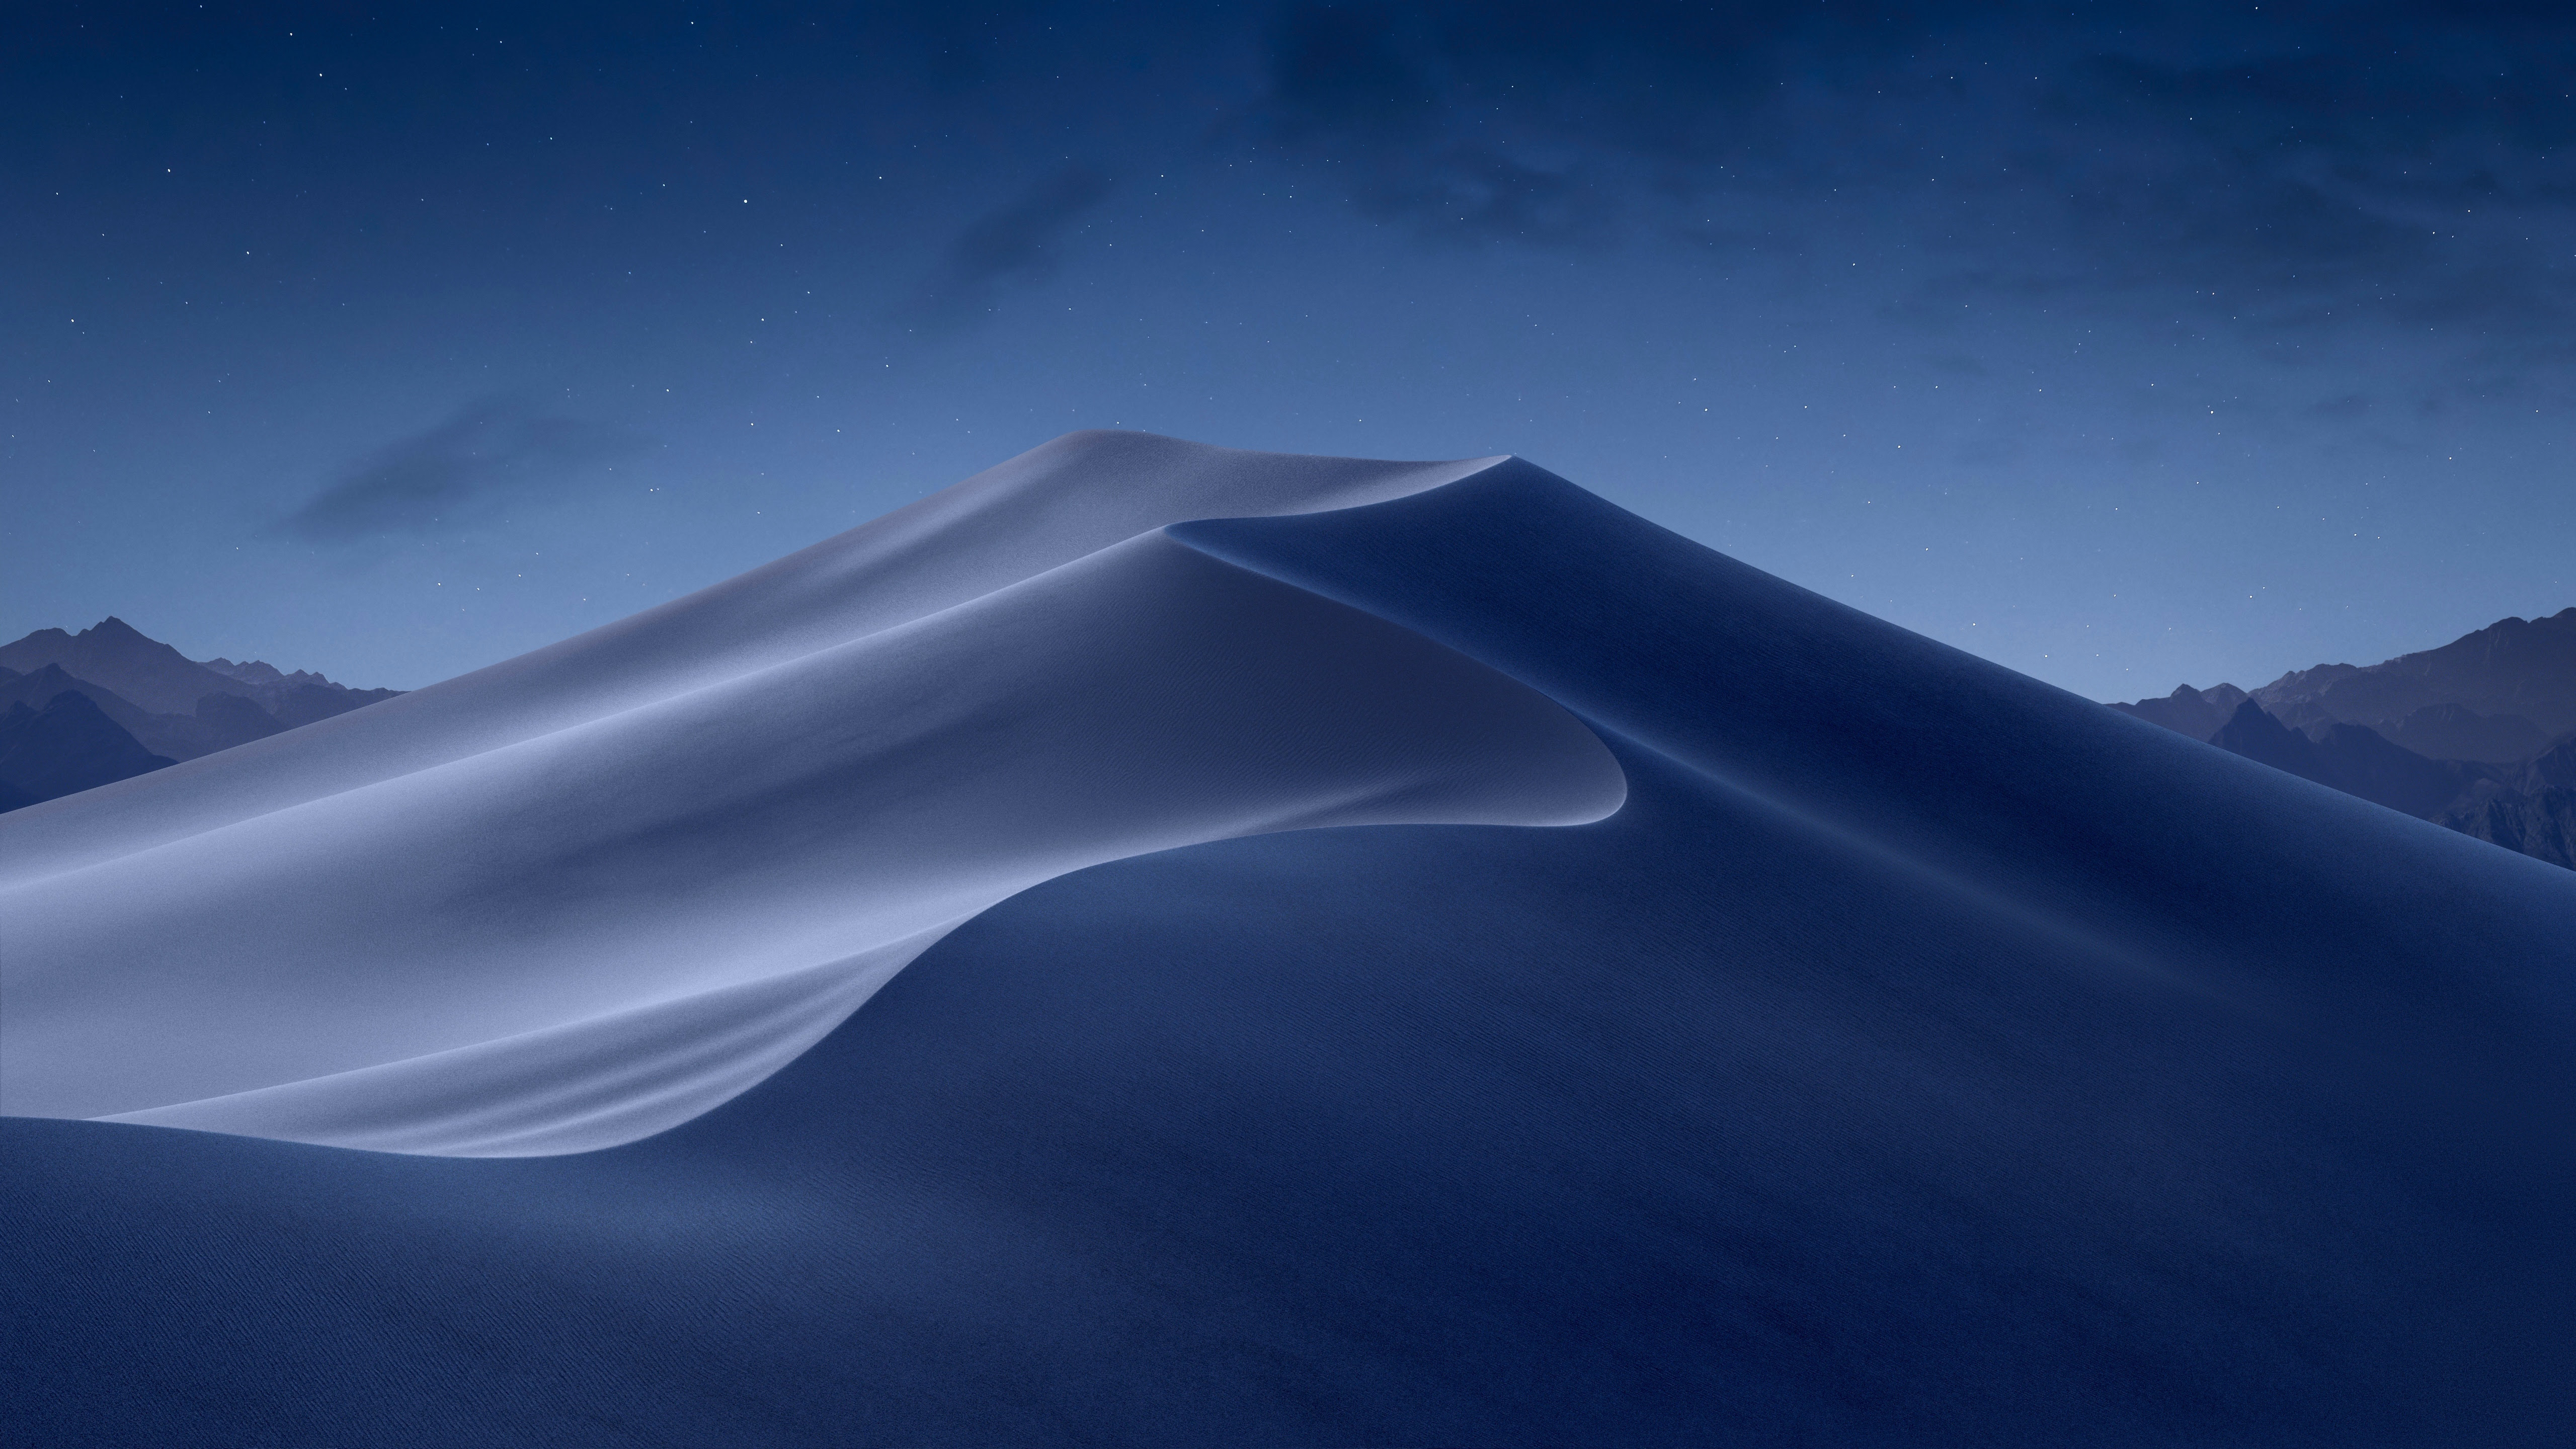 Wallpaper Mac Os Mojave Wallpaper Hd For Android